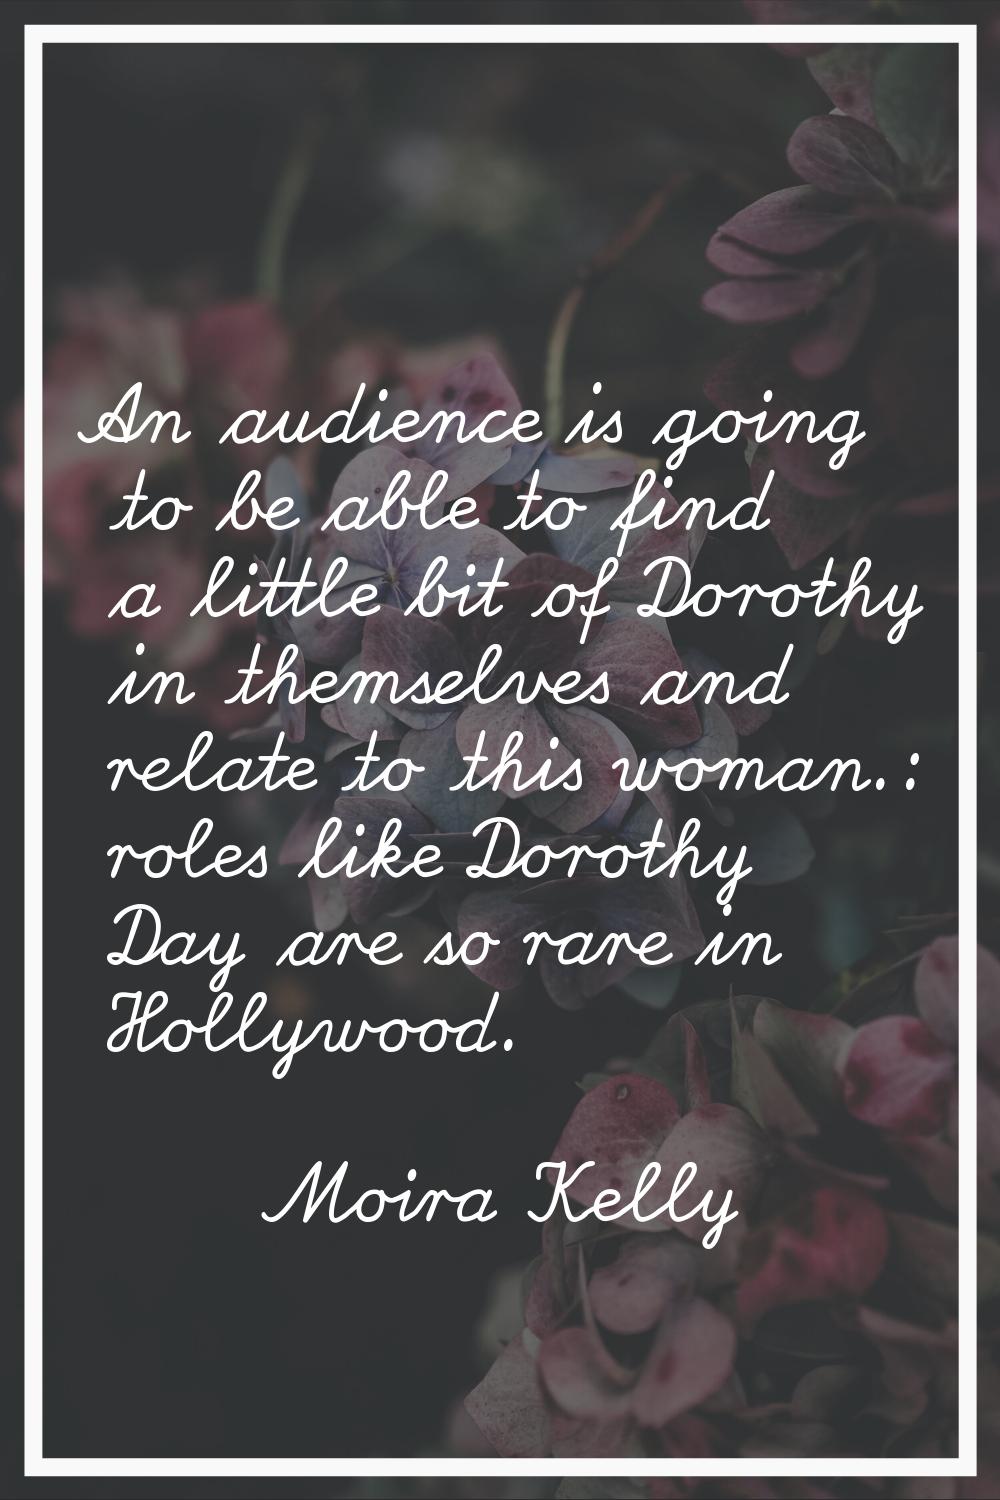 An audience is going to be able to find a little bit of Dorothy in themselves and relate to this wo